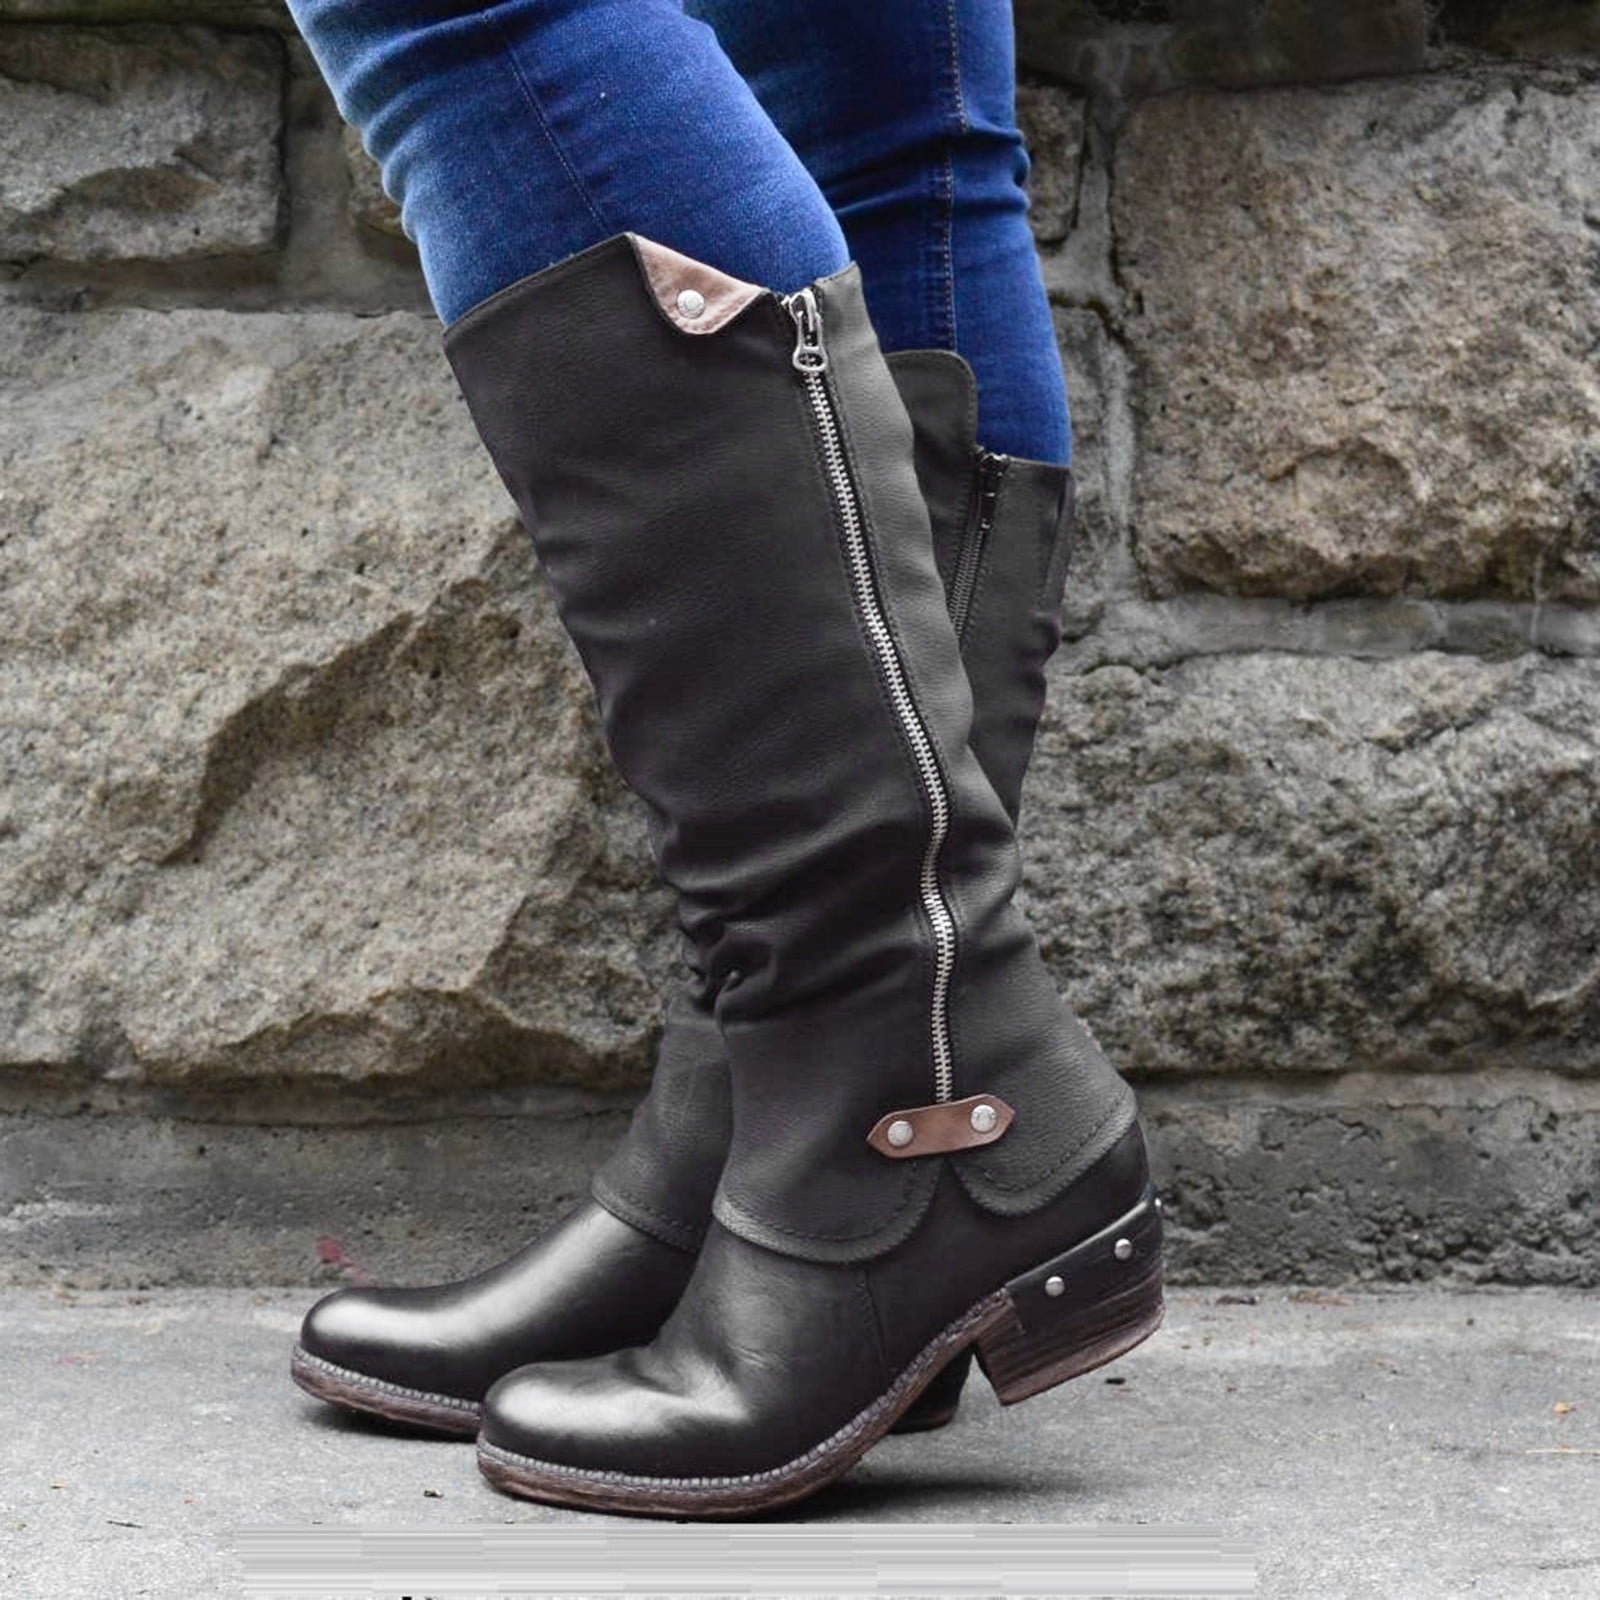 Women's Knee High Soft PU Leather Boots Shoes Low Cuban Heel Pull On Buckle New 